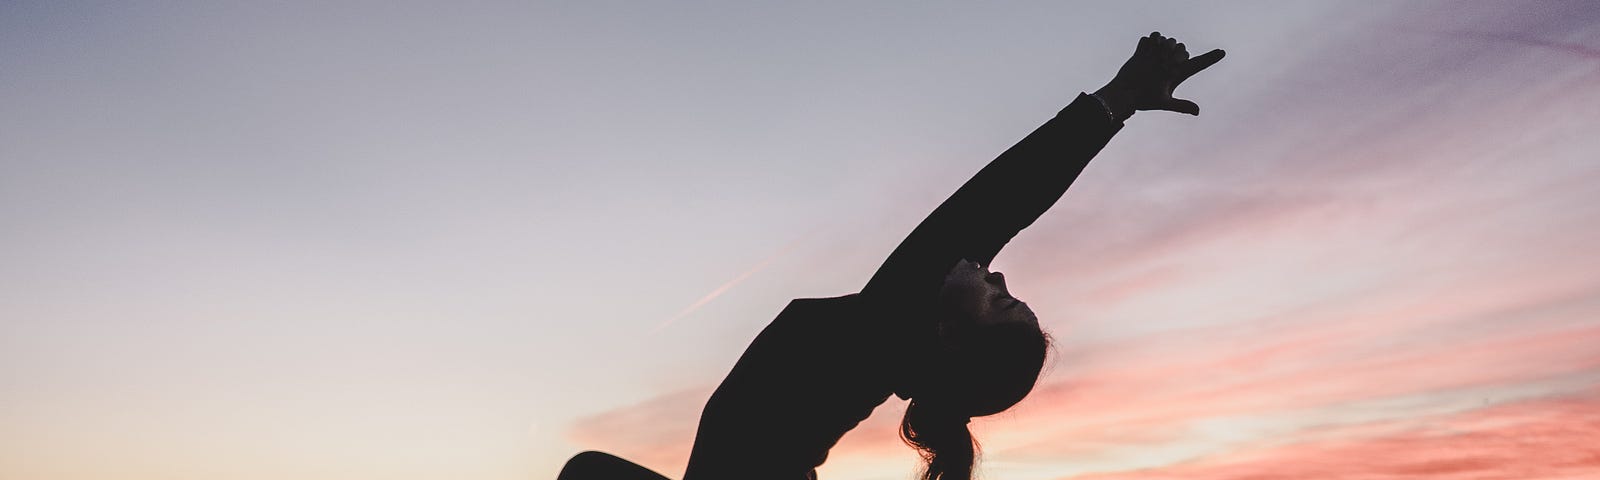 Woman facing to the left of the screen practices yoga. Her right knee is forward, and her left leg extended behind her on the ground as she bends backward, arms overhead. Sunset in the background.